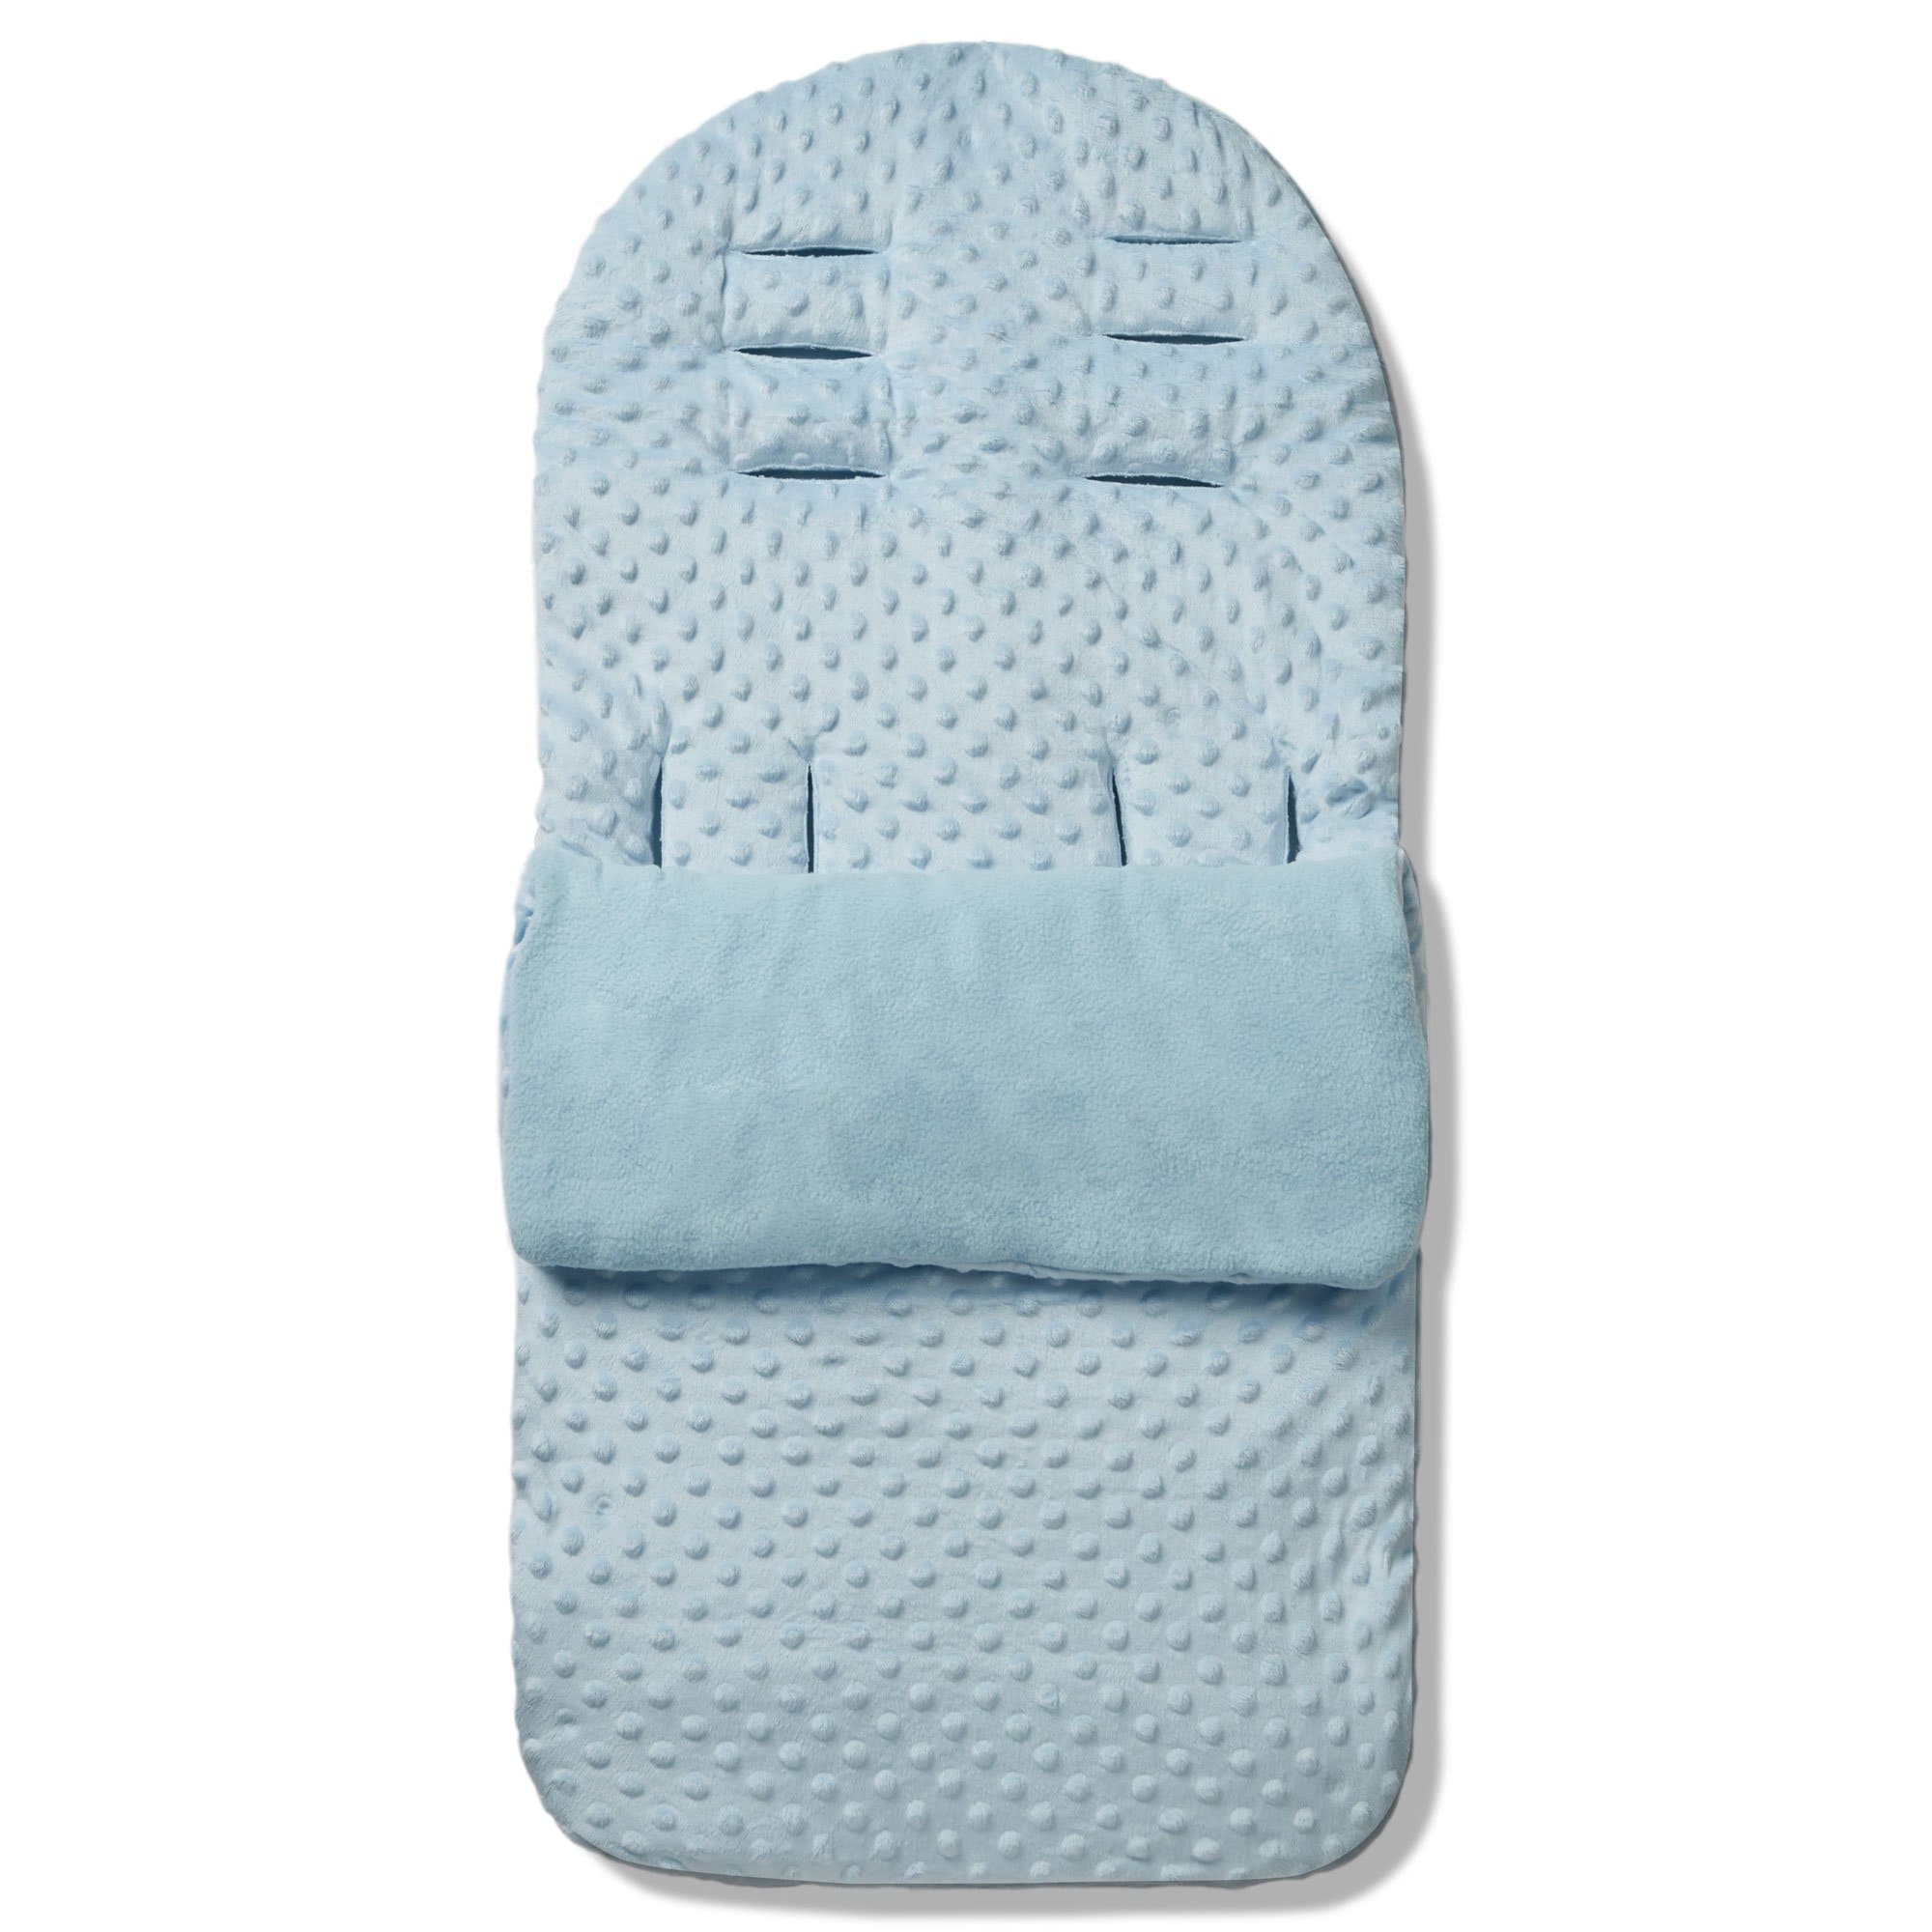 Dimple Footmuff / Cosy Toes Compatible with Graco - Blue / Fits All Models | For Your Little One